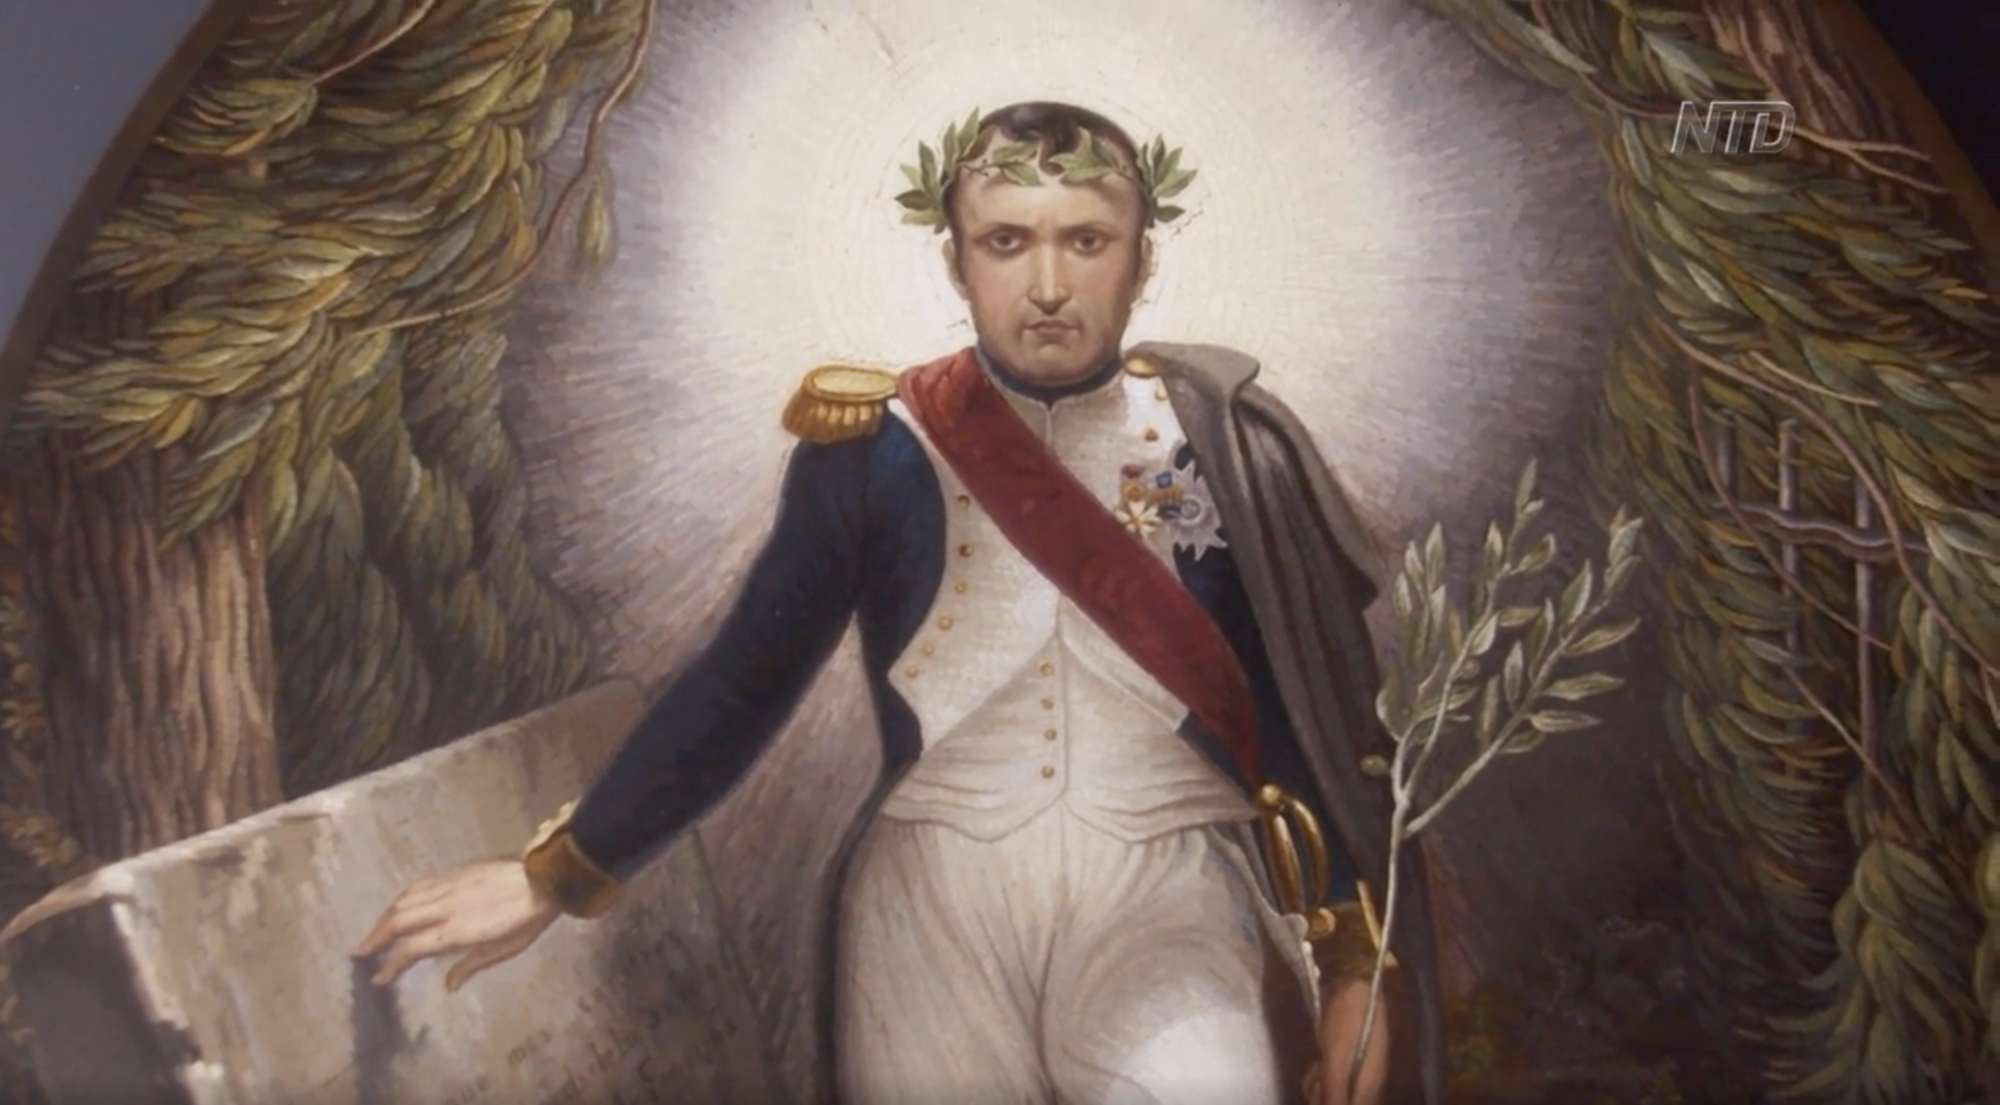 Exhibition Sheds Light on Napoleon’s Legacy